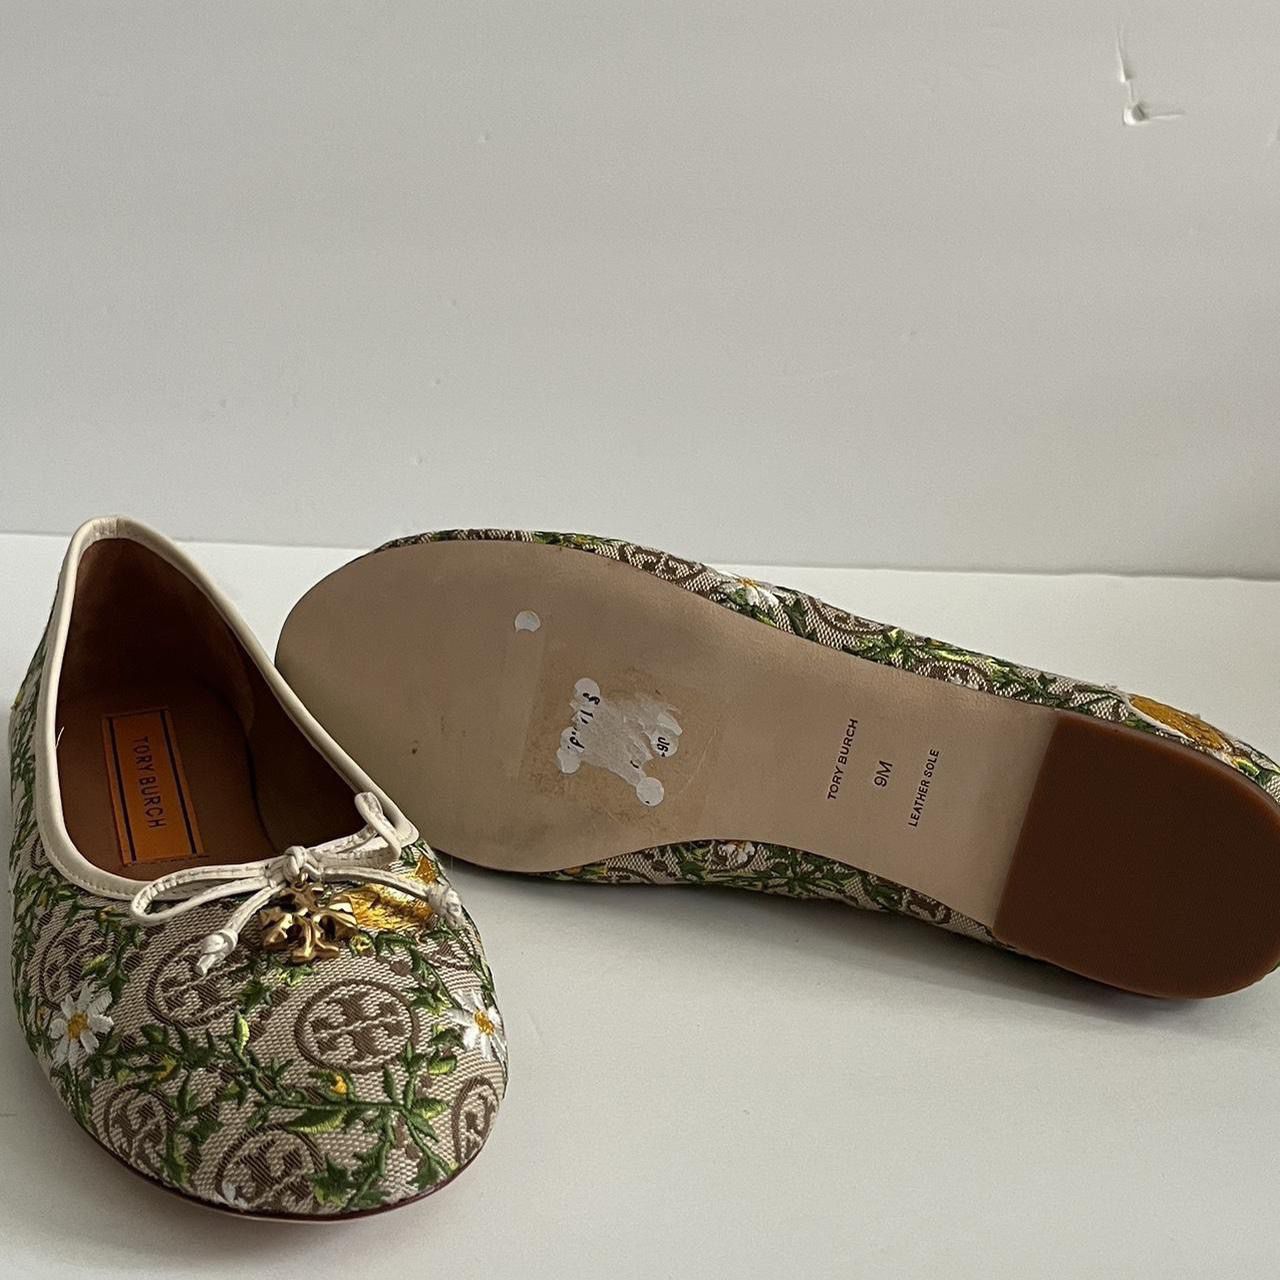 Authentic Tory Burch for Sale in Bedford Park, IL - OfferUp